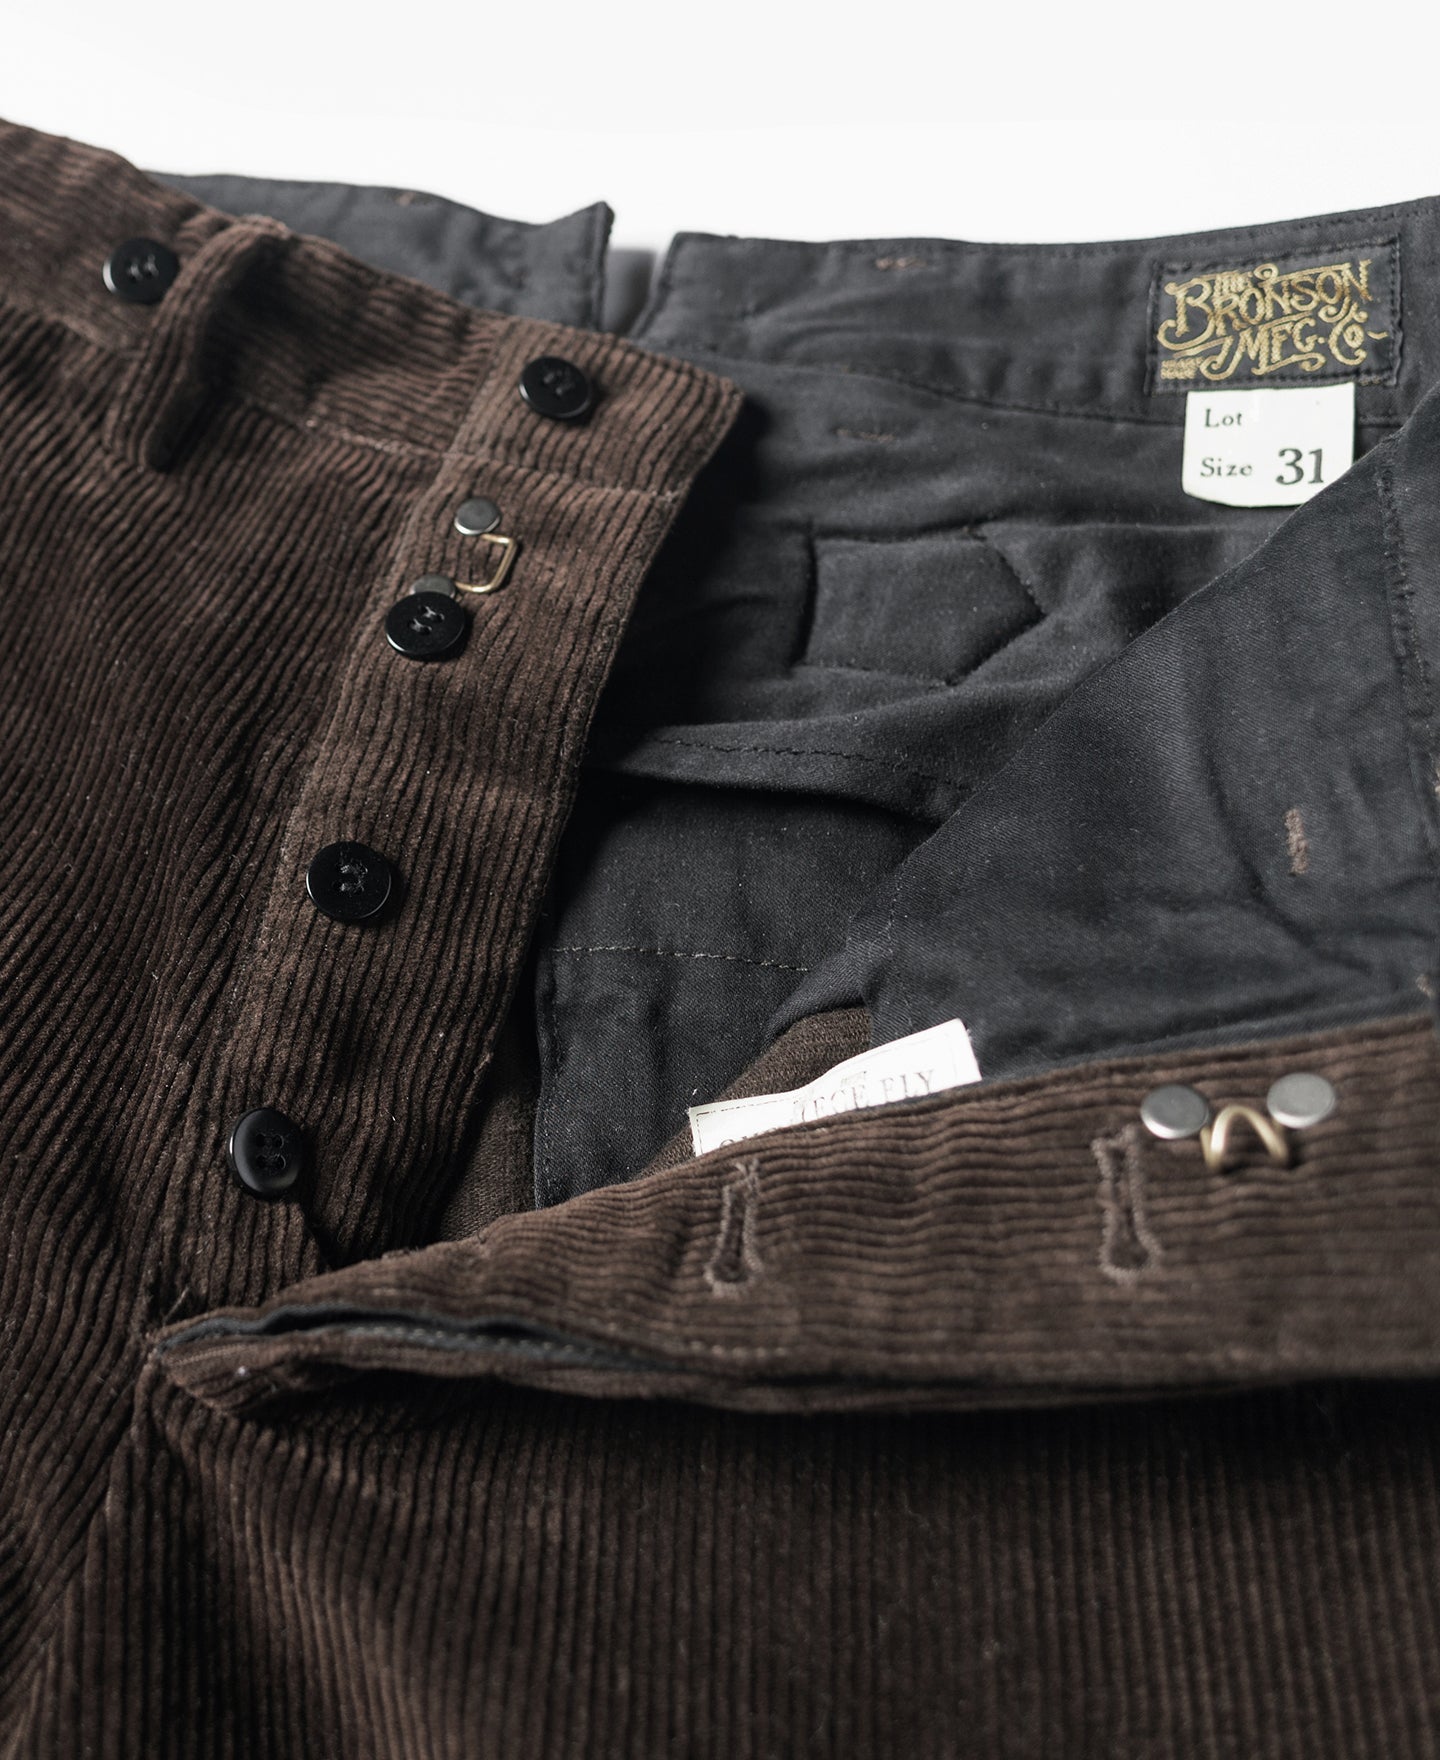 1920s Heavy-Duty Corduroy Work Pants｜Vintage French Work Trousers 